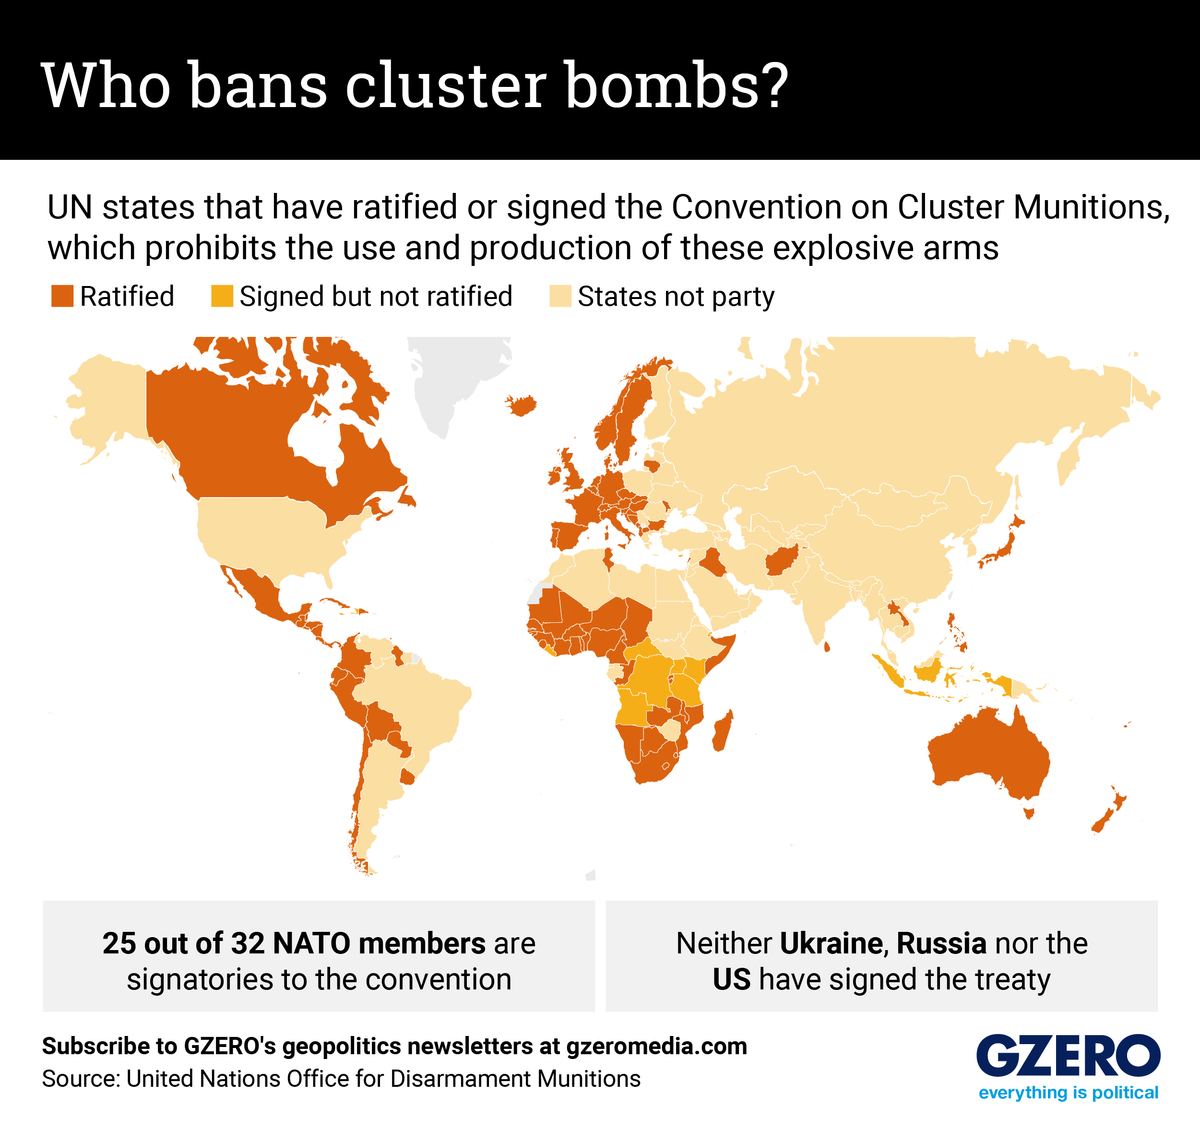 Global heat map of countries signatories to the UN Convention on Cluster Munitions